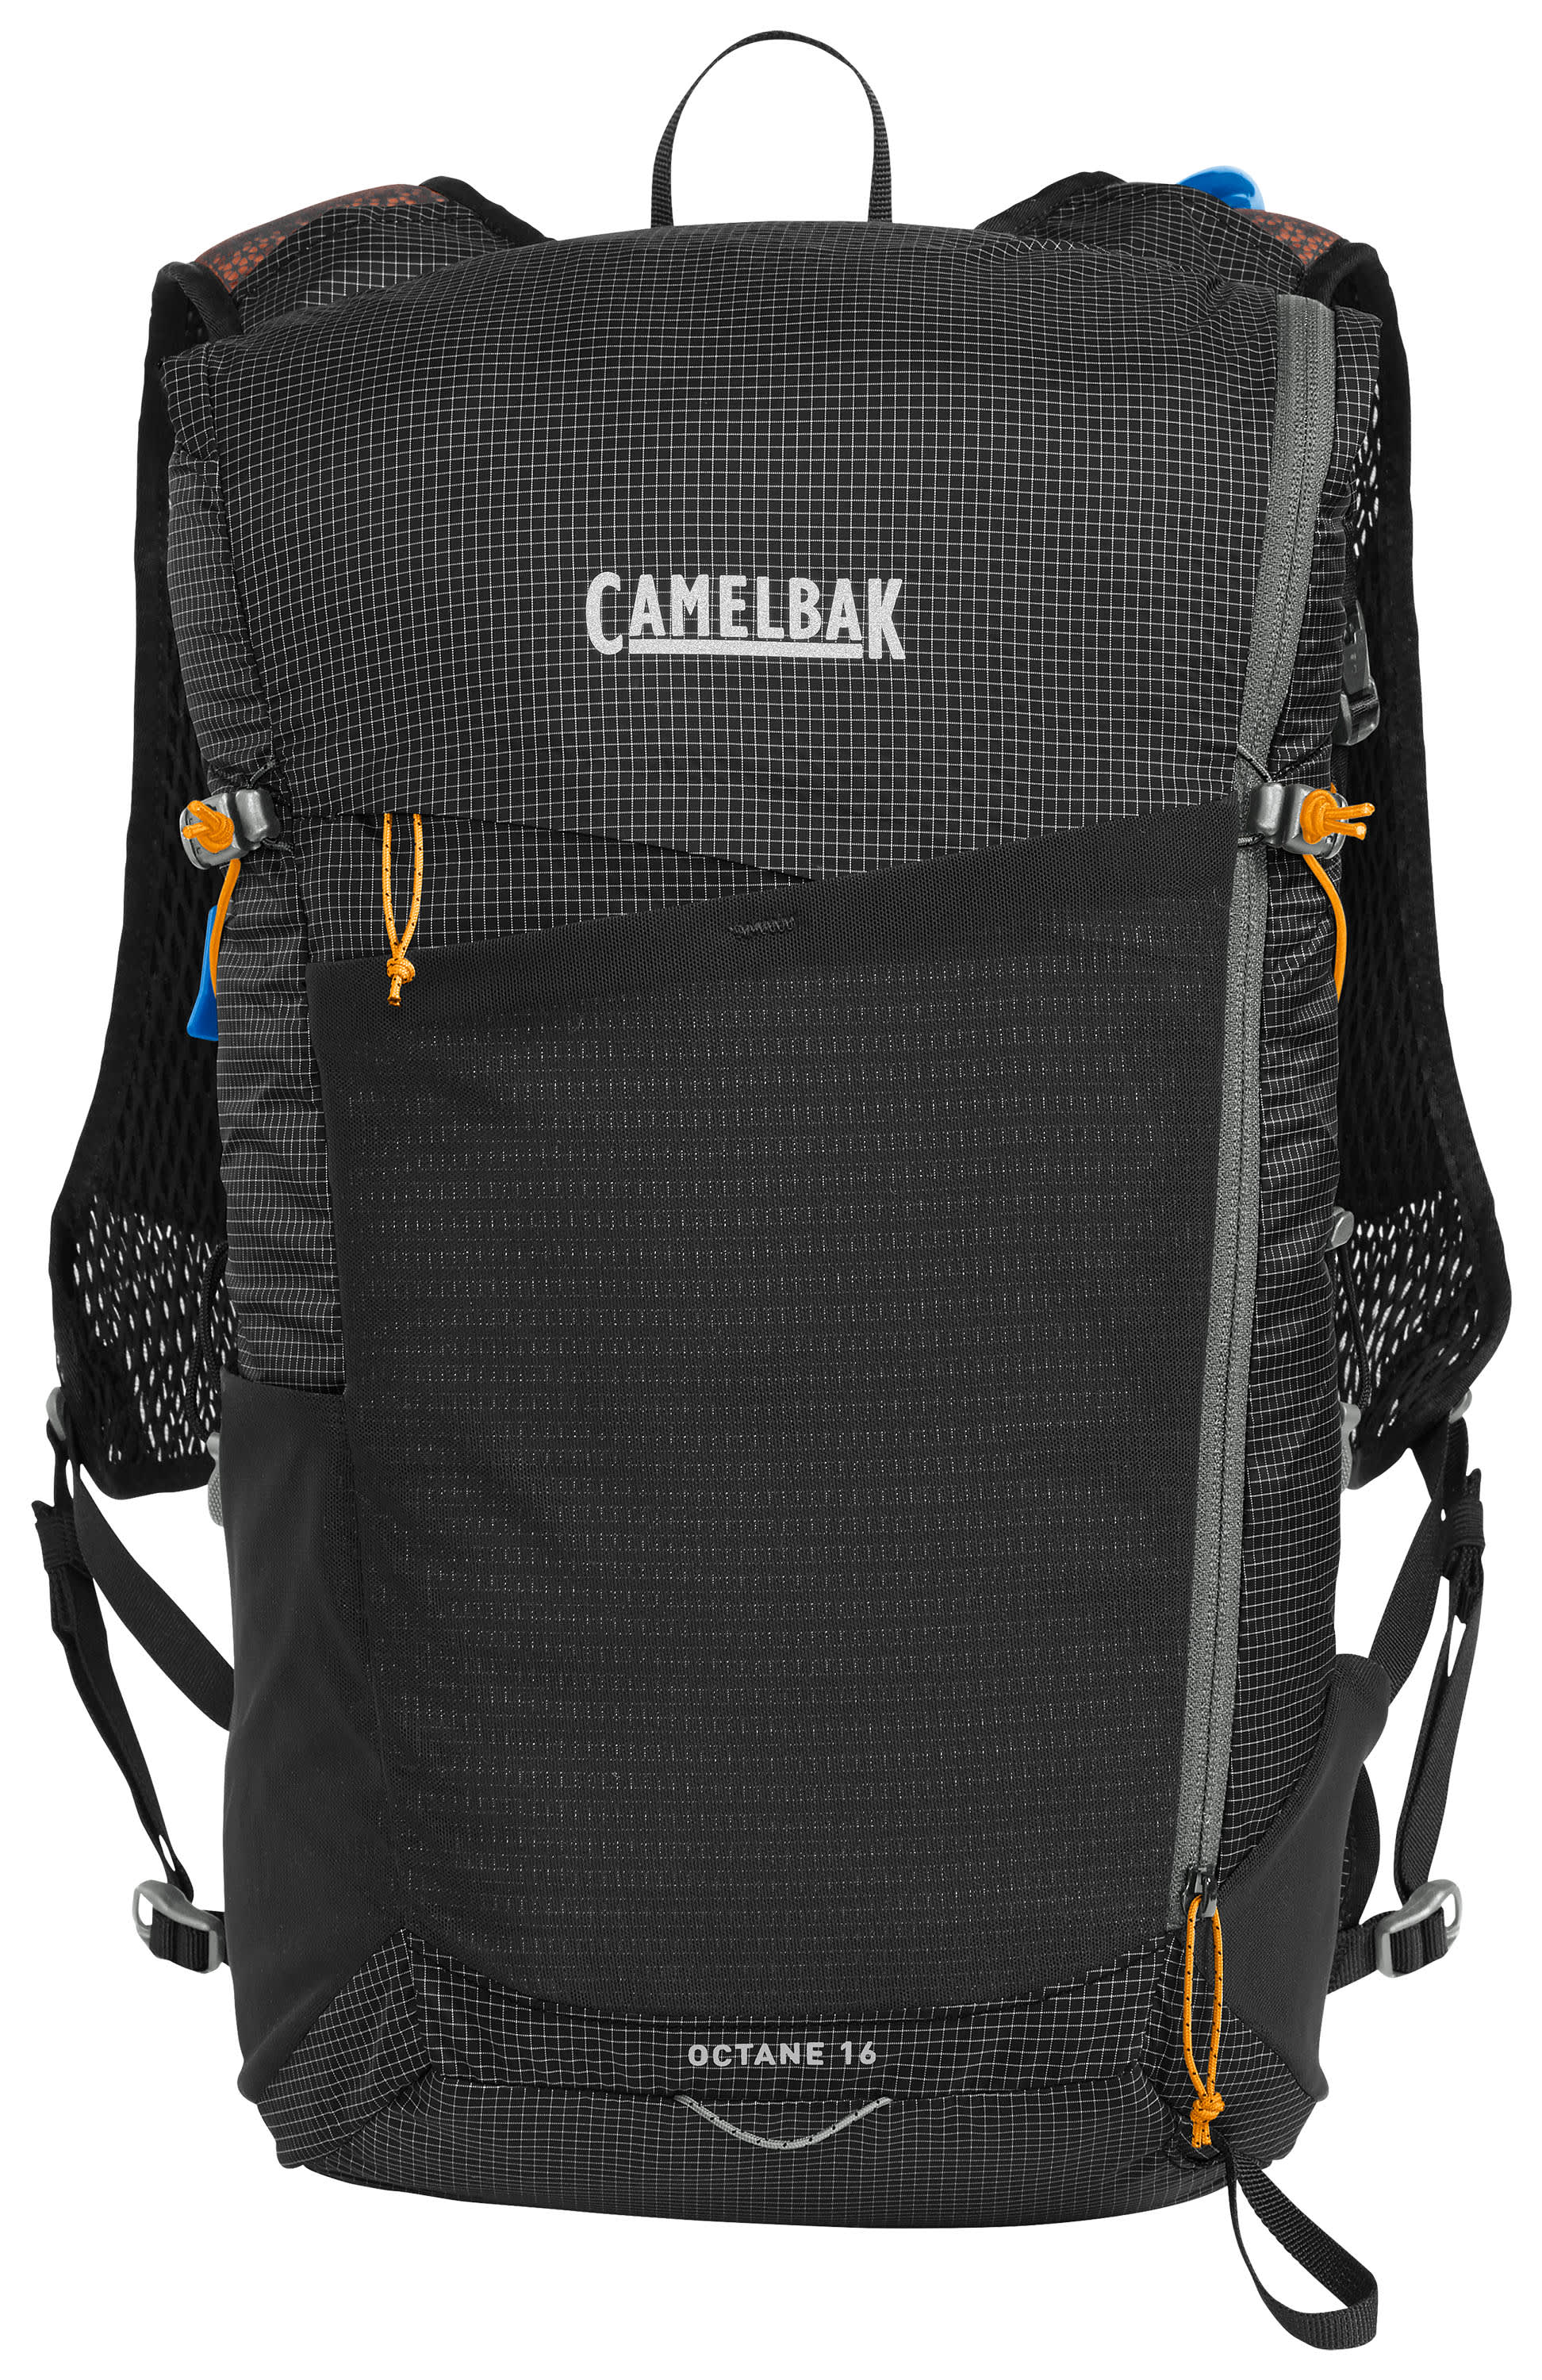 CamelBak® Octane™ 16 Hydration Hiking Pack with Fusion™ 2L Reservoir